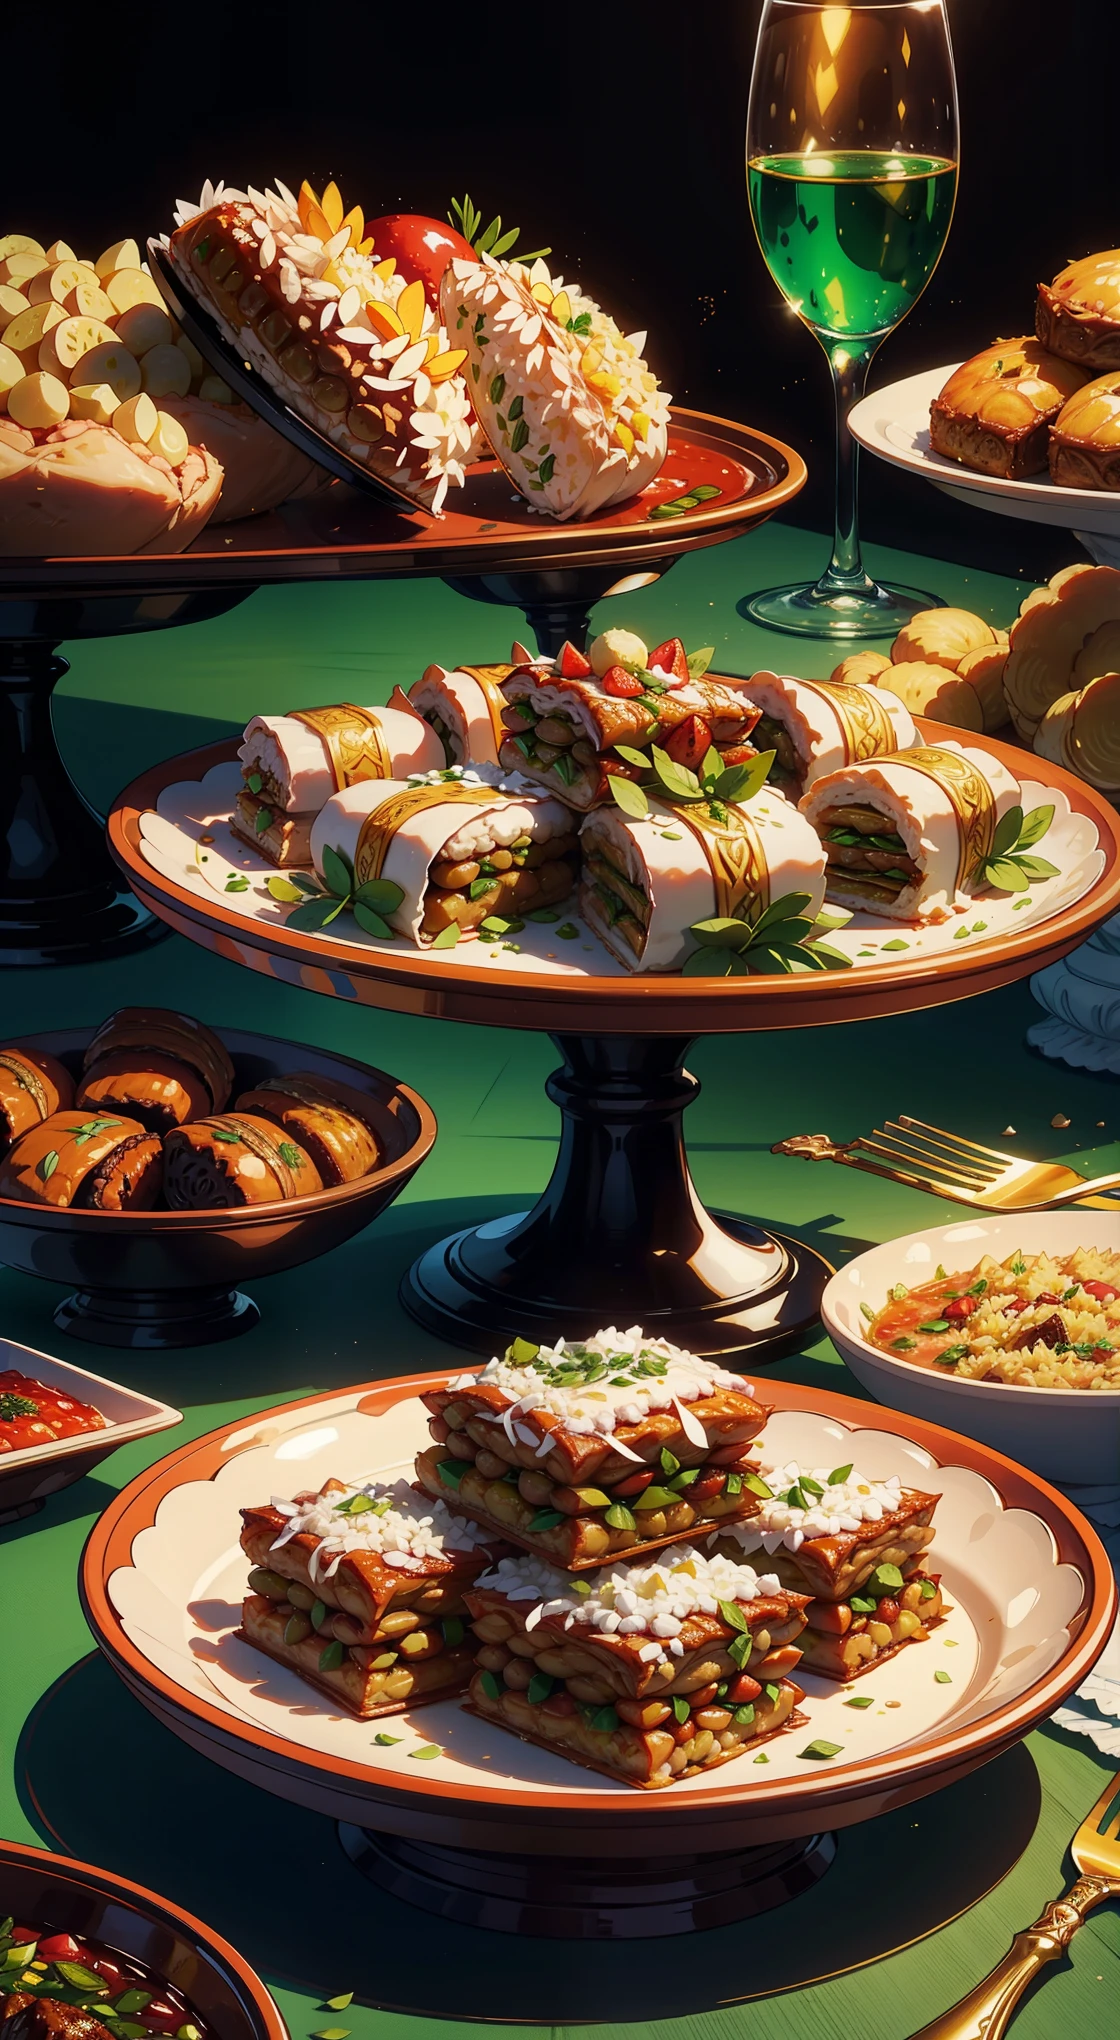 Illustrate a lavish spread of delicious Eid delicacies, including succulent lamb or goat dishes, aromatic rice, and an array of delectable sweets like baklava and ma'amoul.